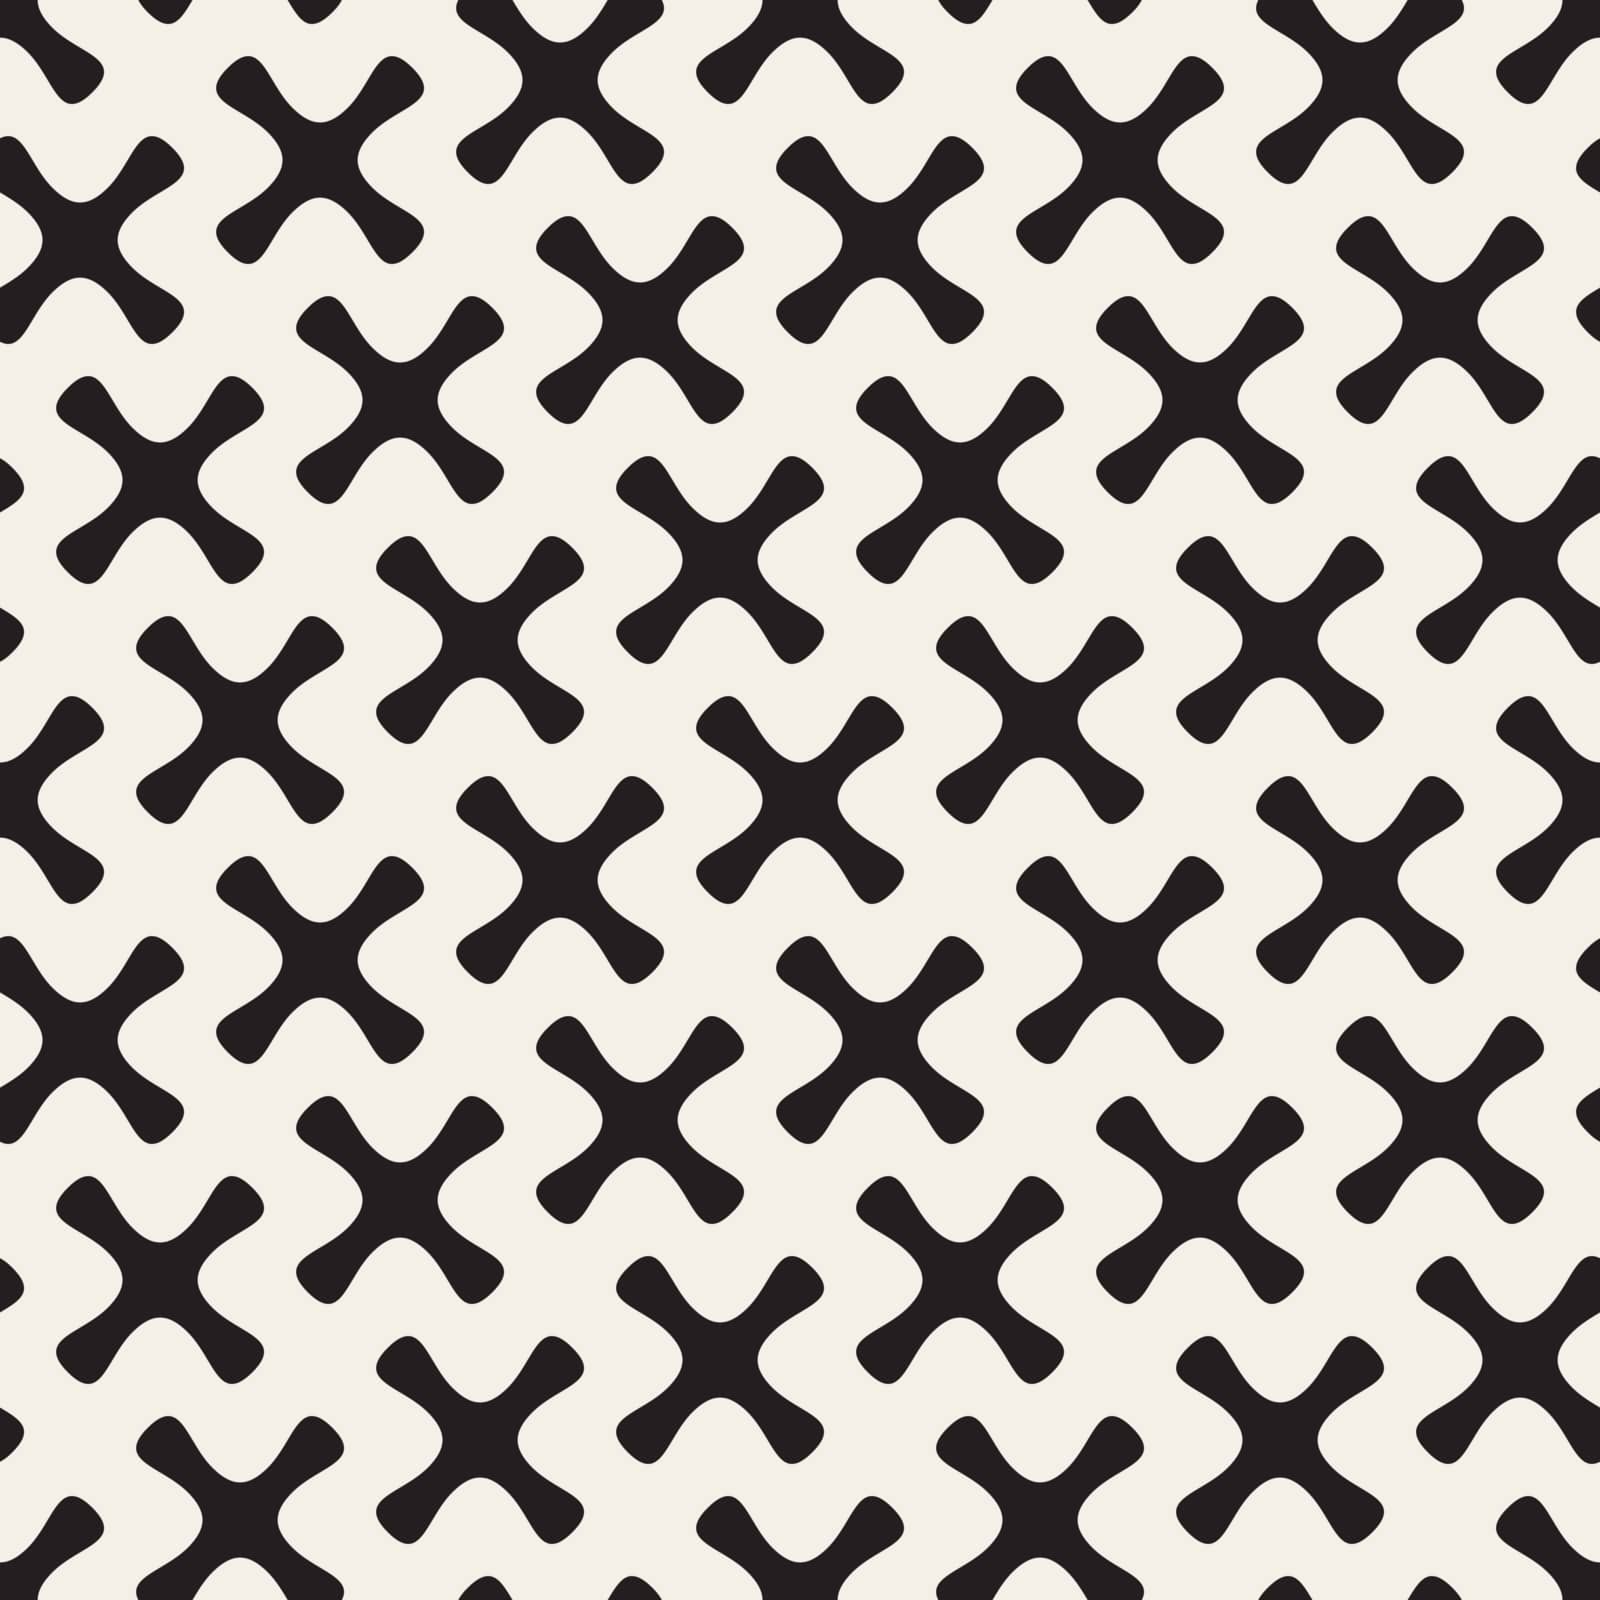 Vector Seamless Black And White Rounded Cross Pattern. Abstract Geometric Background Design